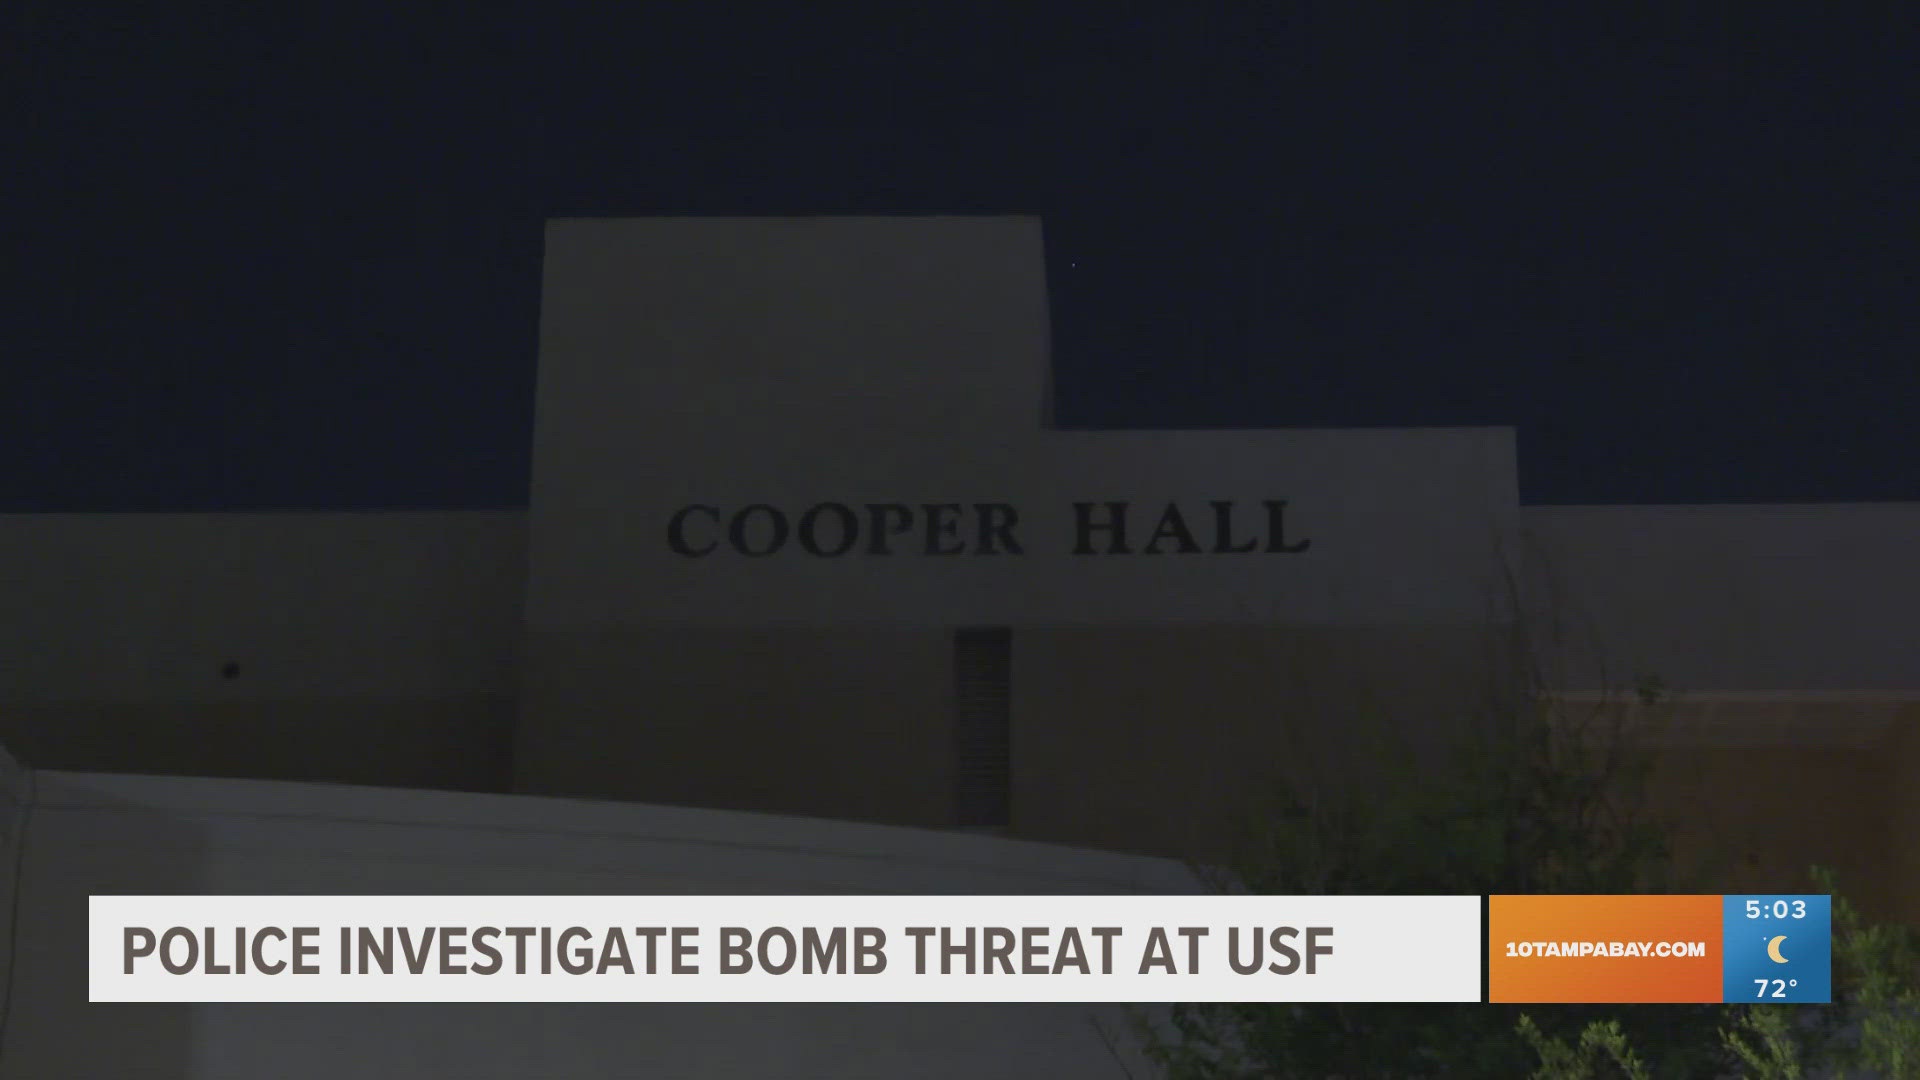 Students were asked to avoid the area of Cooper Hall for about 30 minutes on Tuesday night.